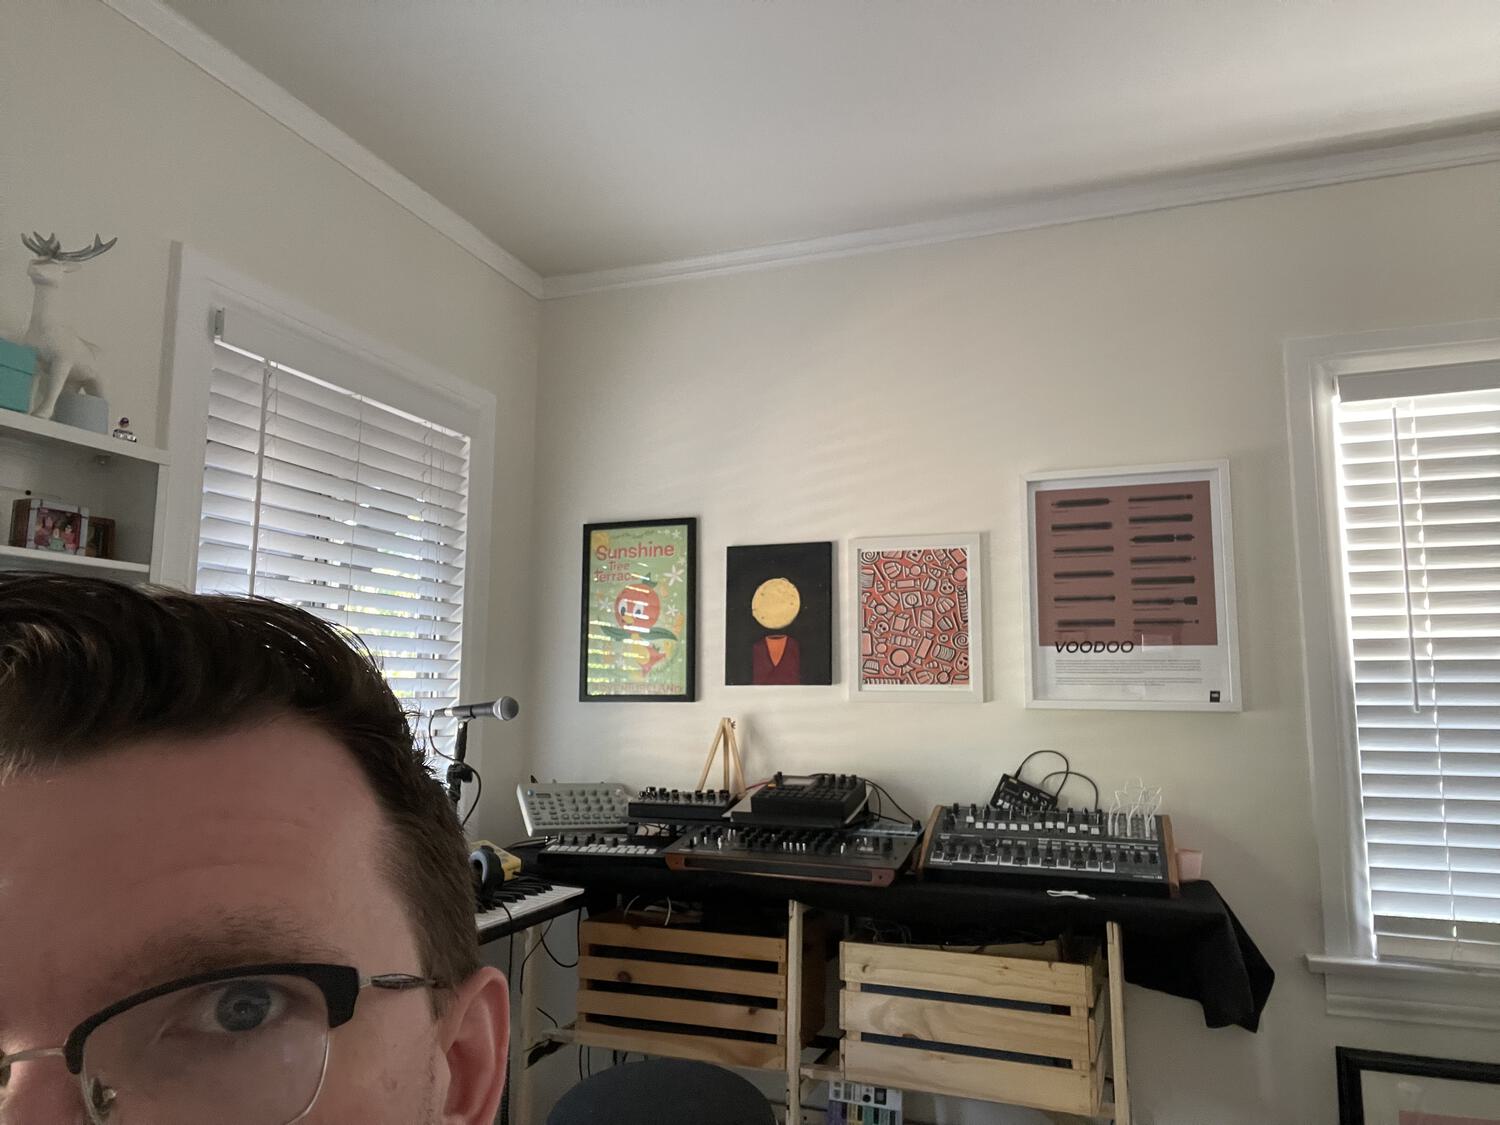 A selfie focused on the wall over my shoulder, where various prints and paintings are framed and mounted